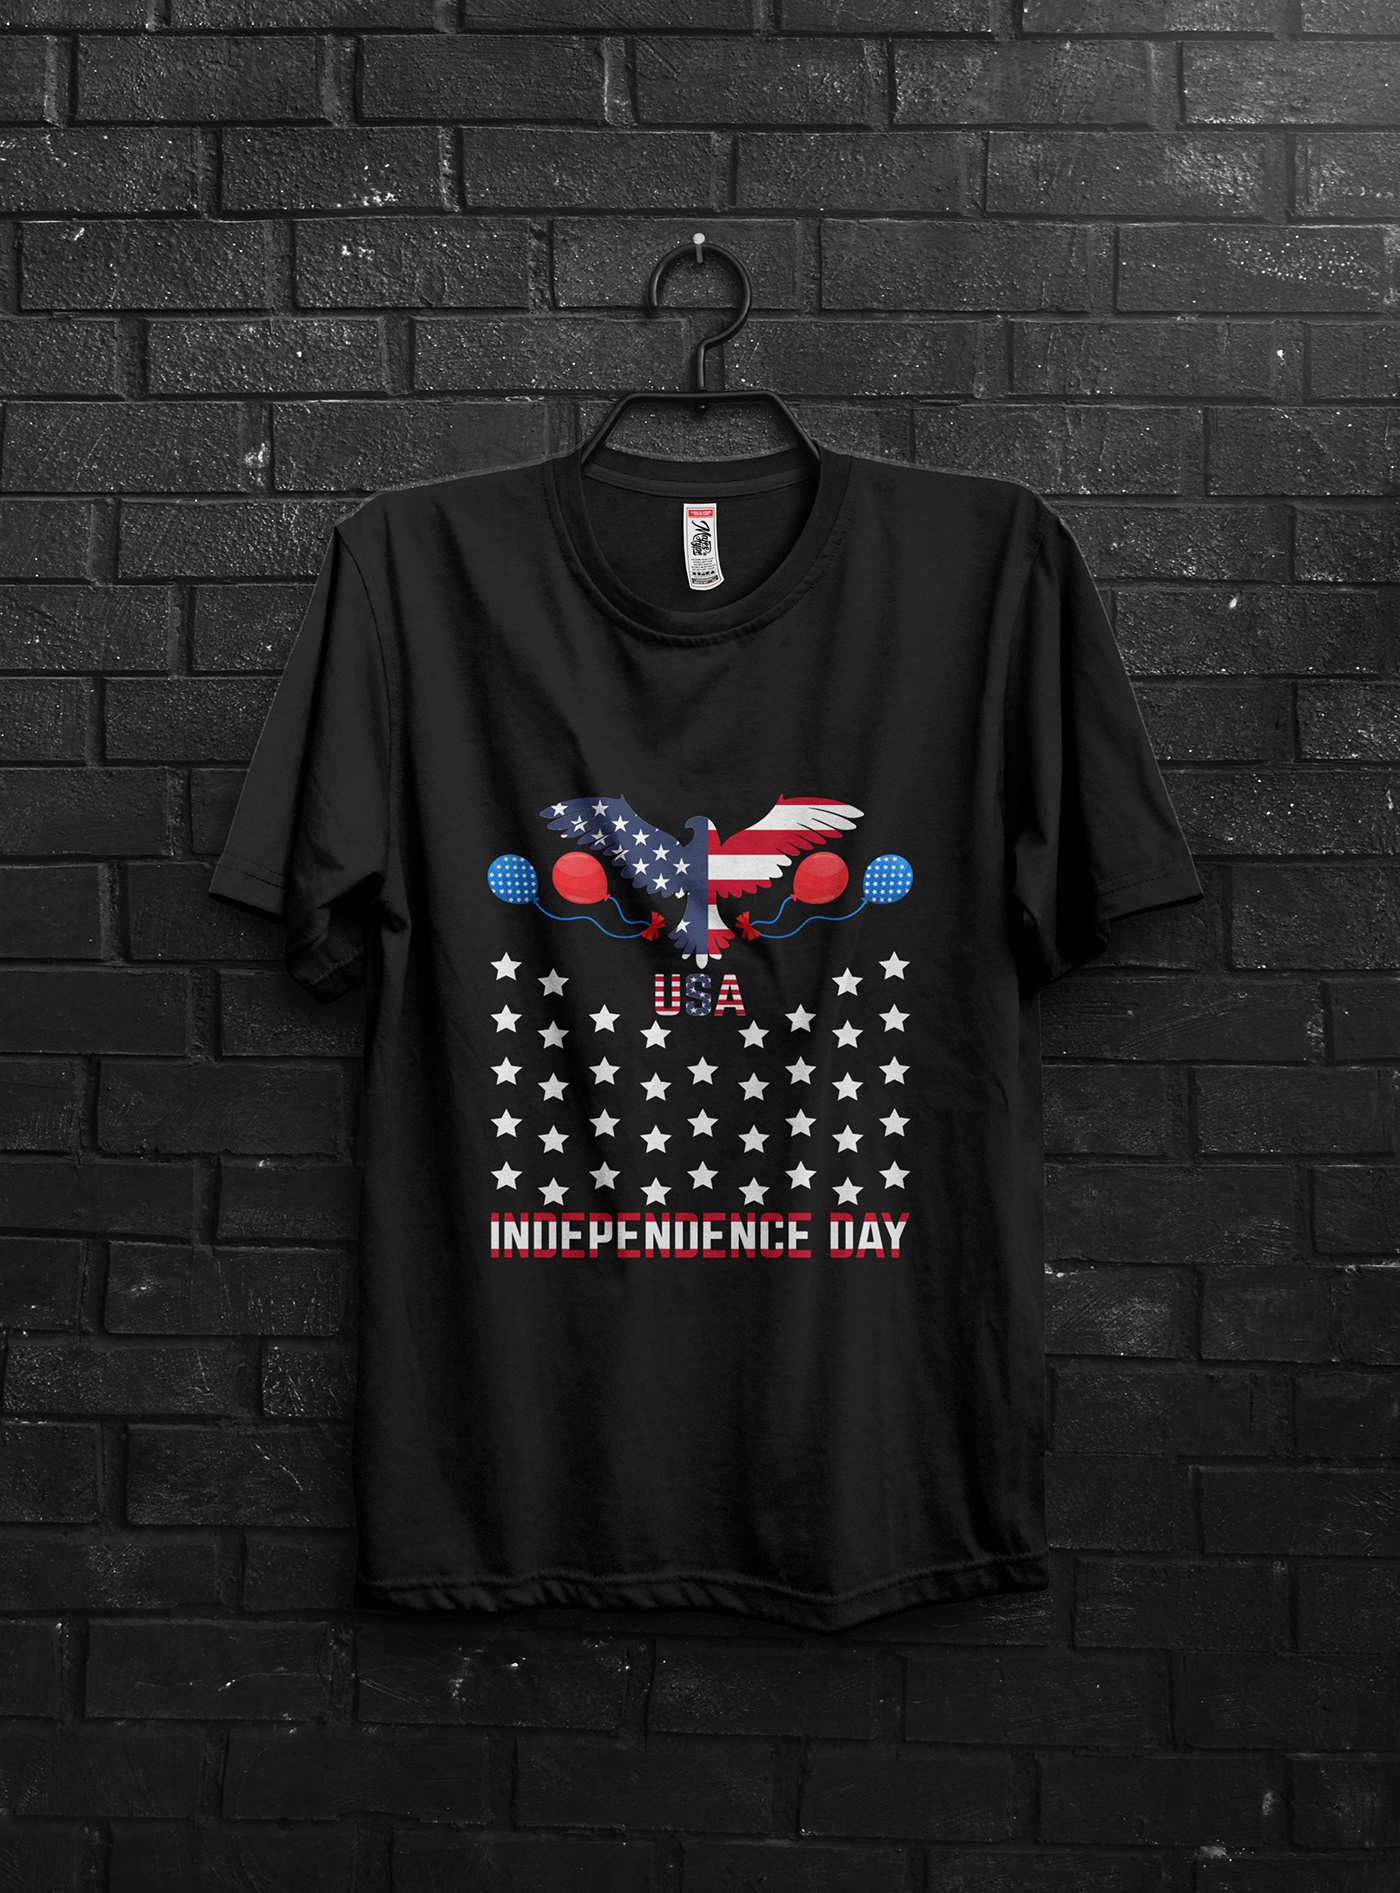 t-shirt typography   T-Shirt Design independence day 4th of July american flag usa design bulk t-shirt design united states